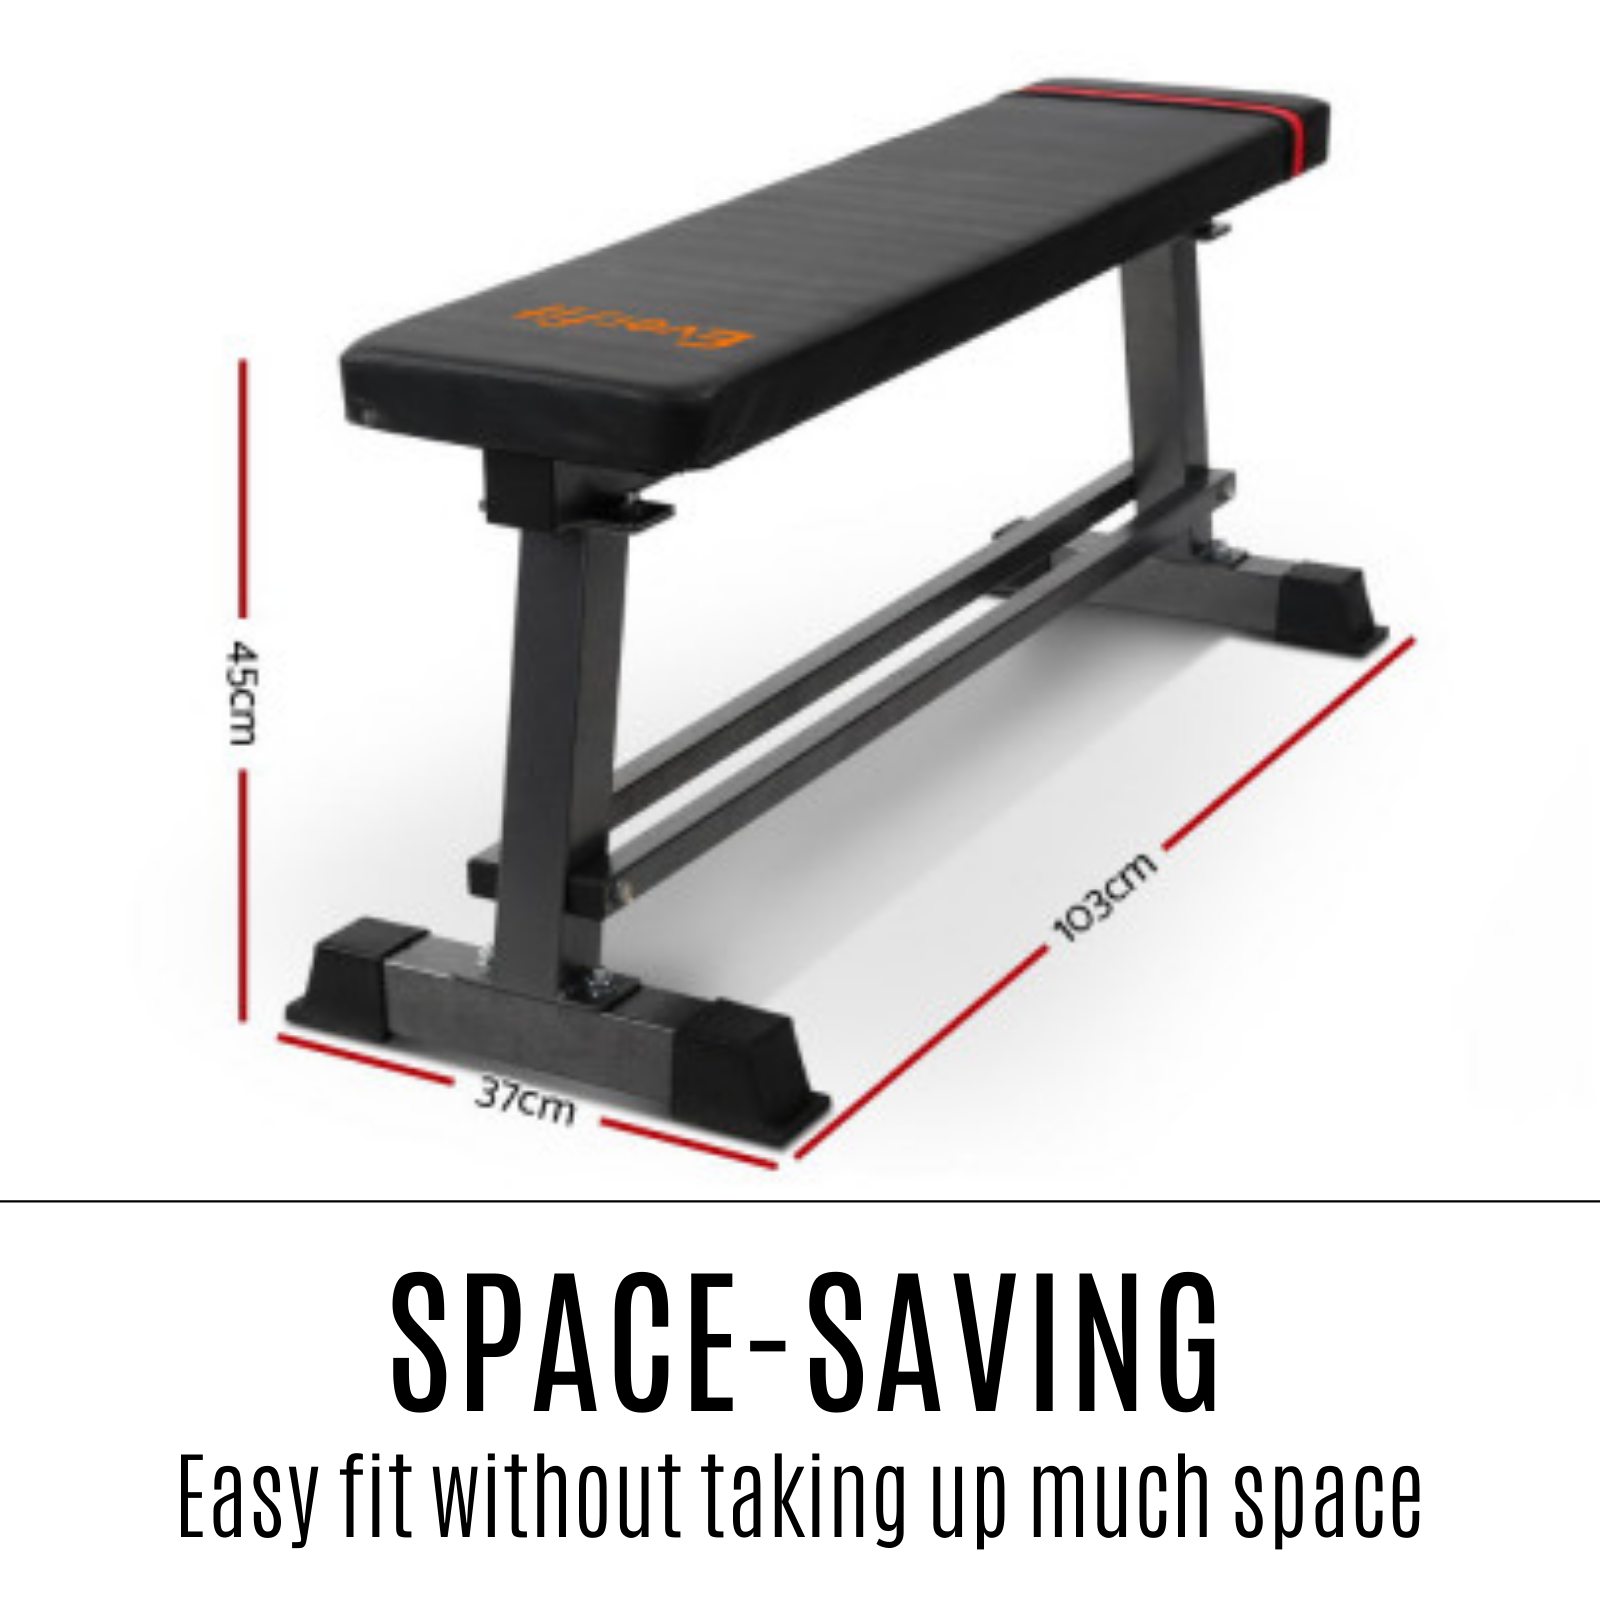 Everfit Fitness Bench